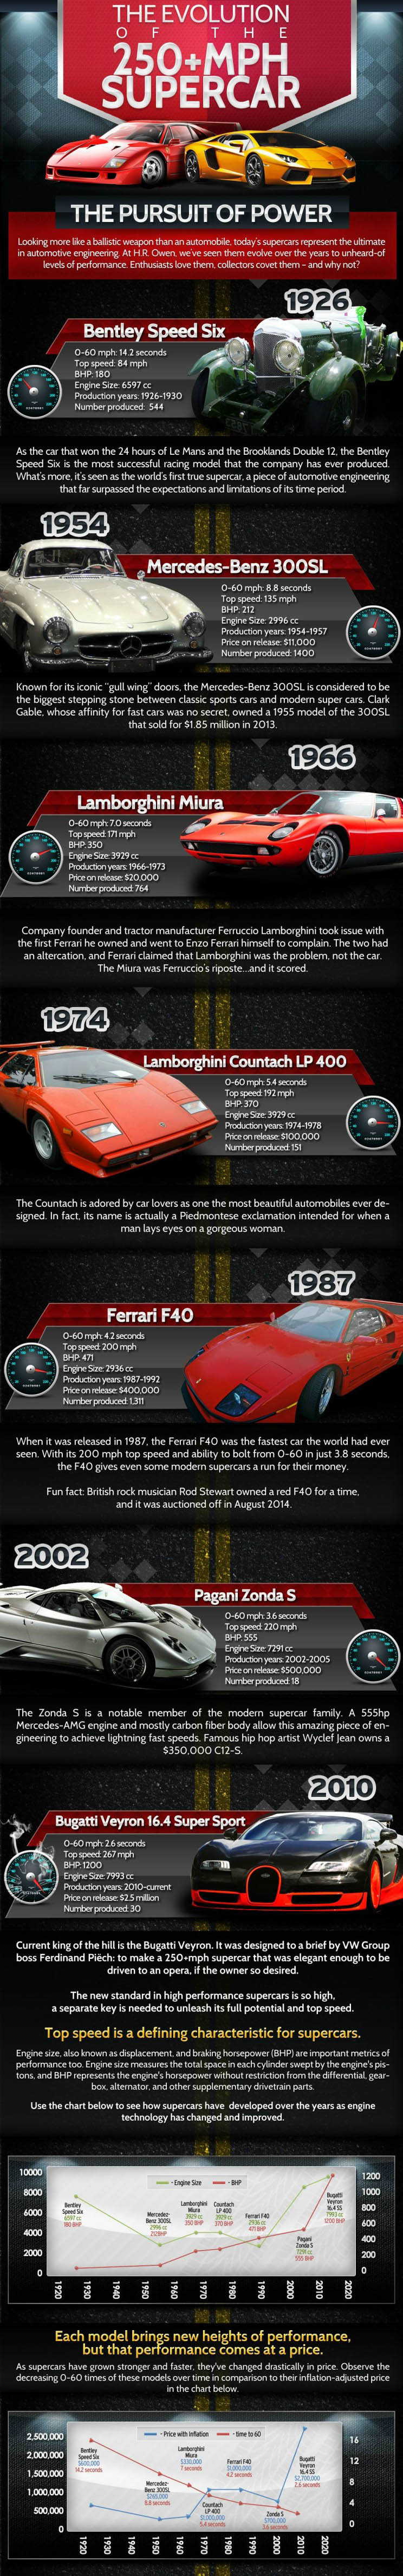 evolution of the supercar